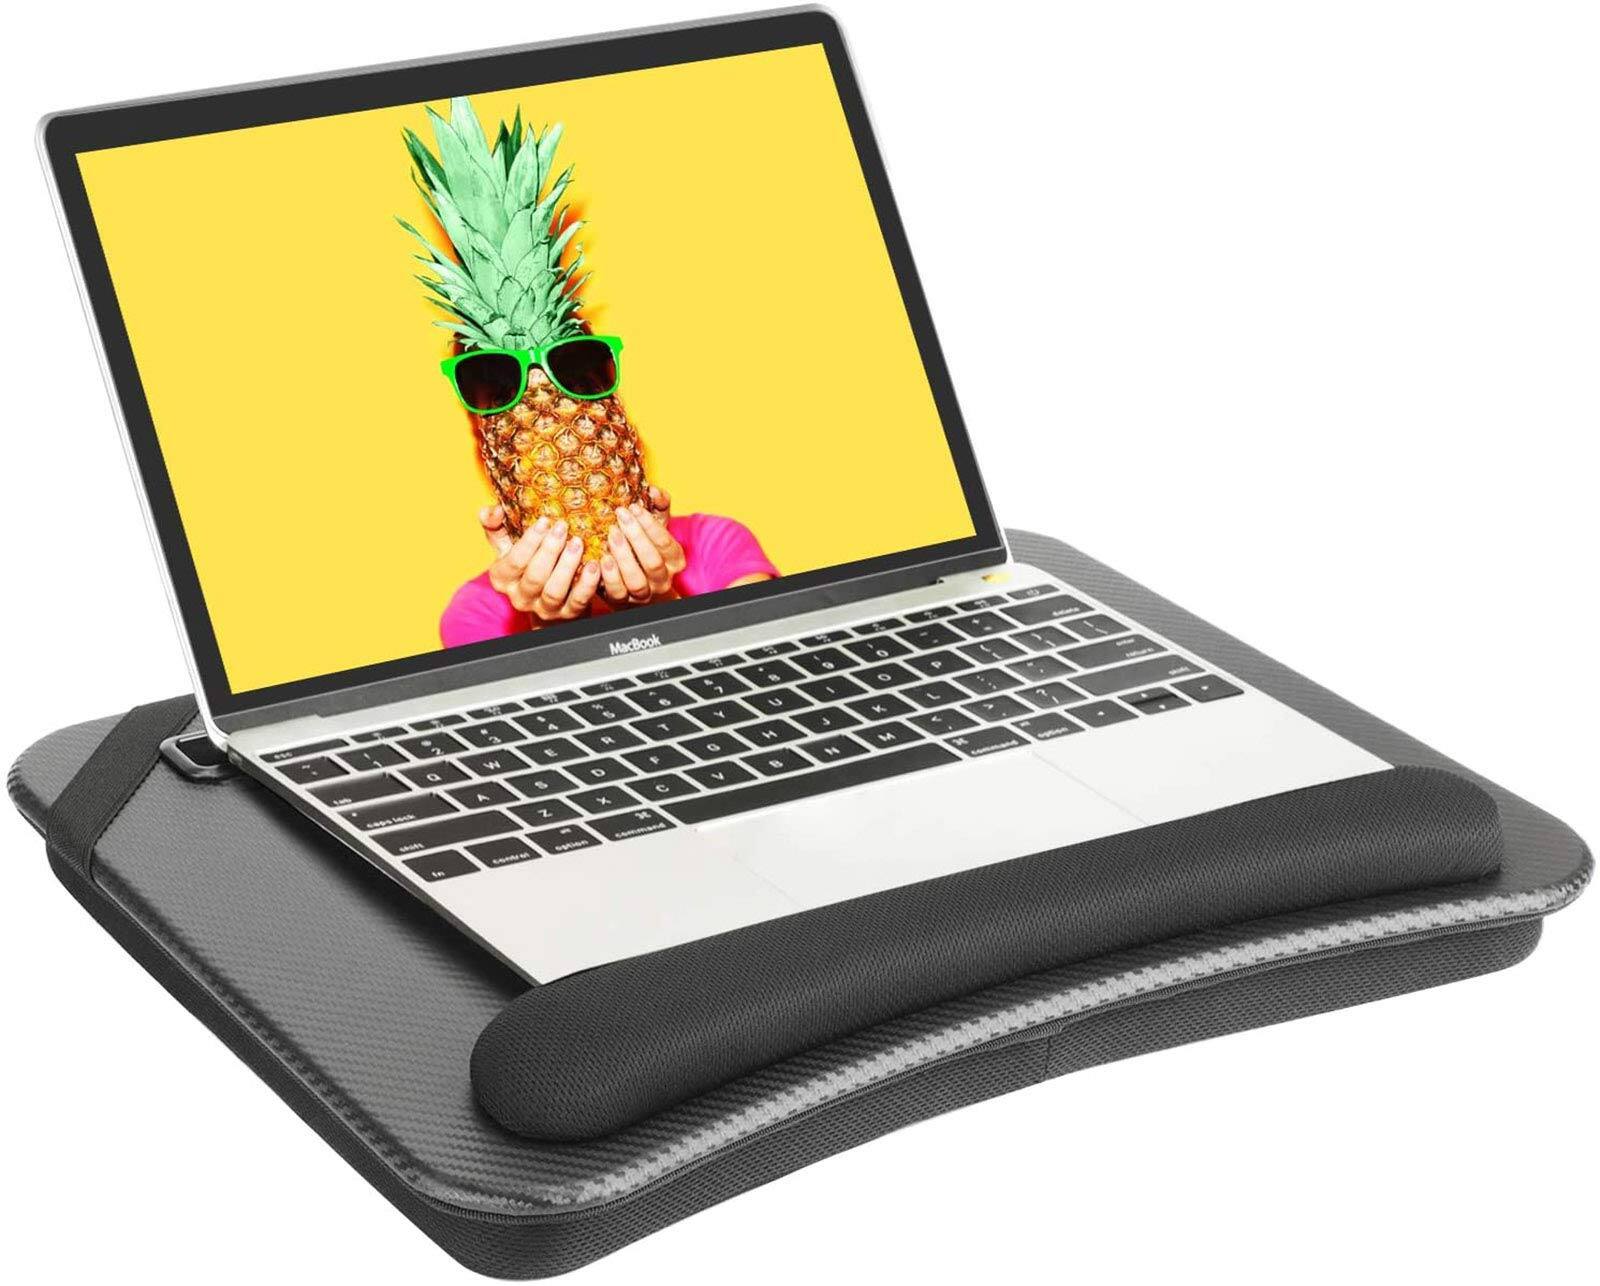 HUANUO Laptop Lap Desk fits up to 14" Inches $8.99 + Free Shipping w/ Amazon Prime or Orders $25+